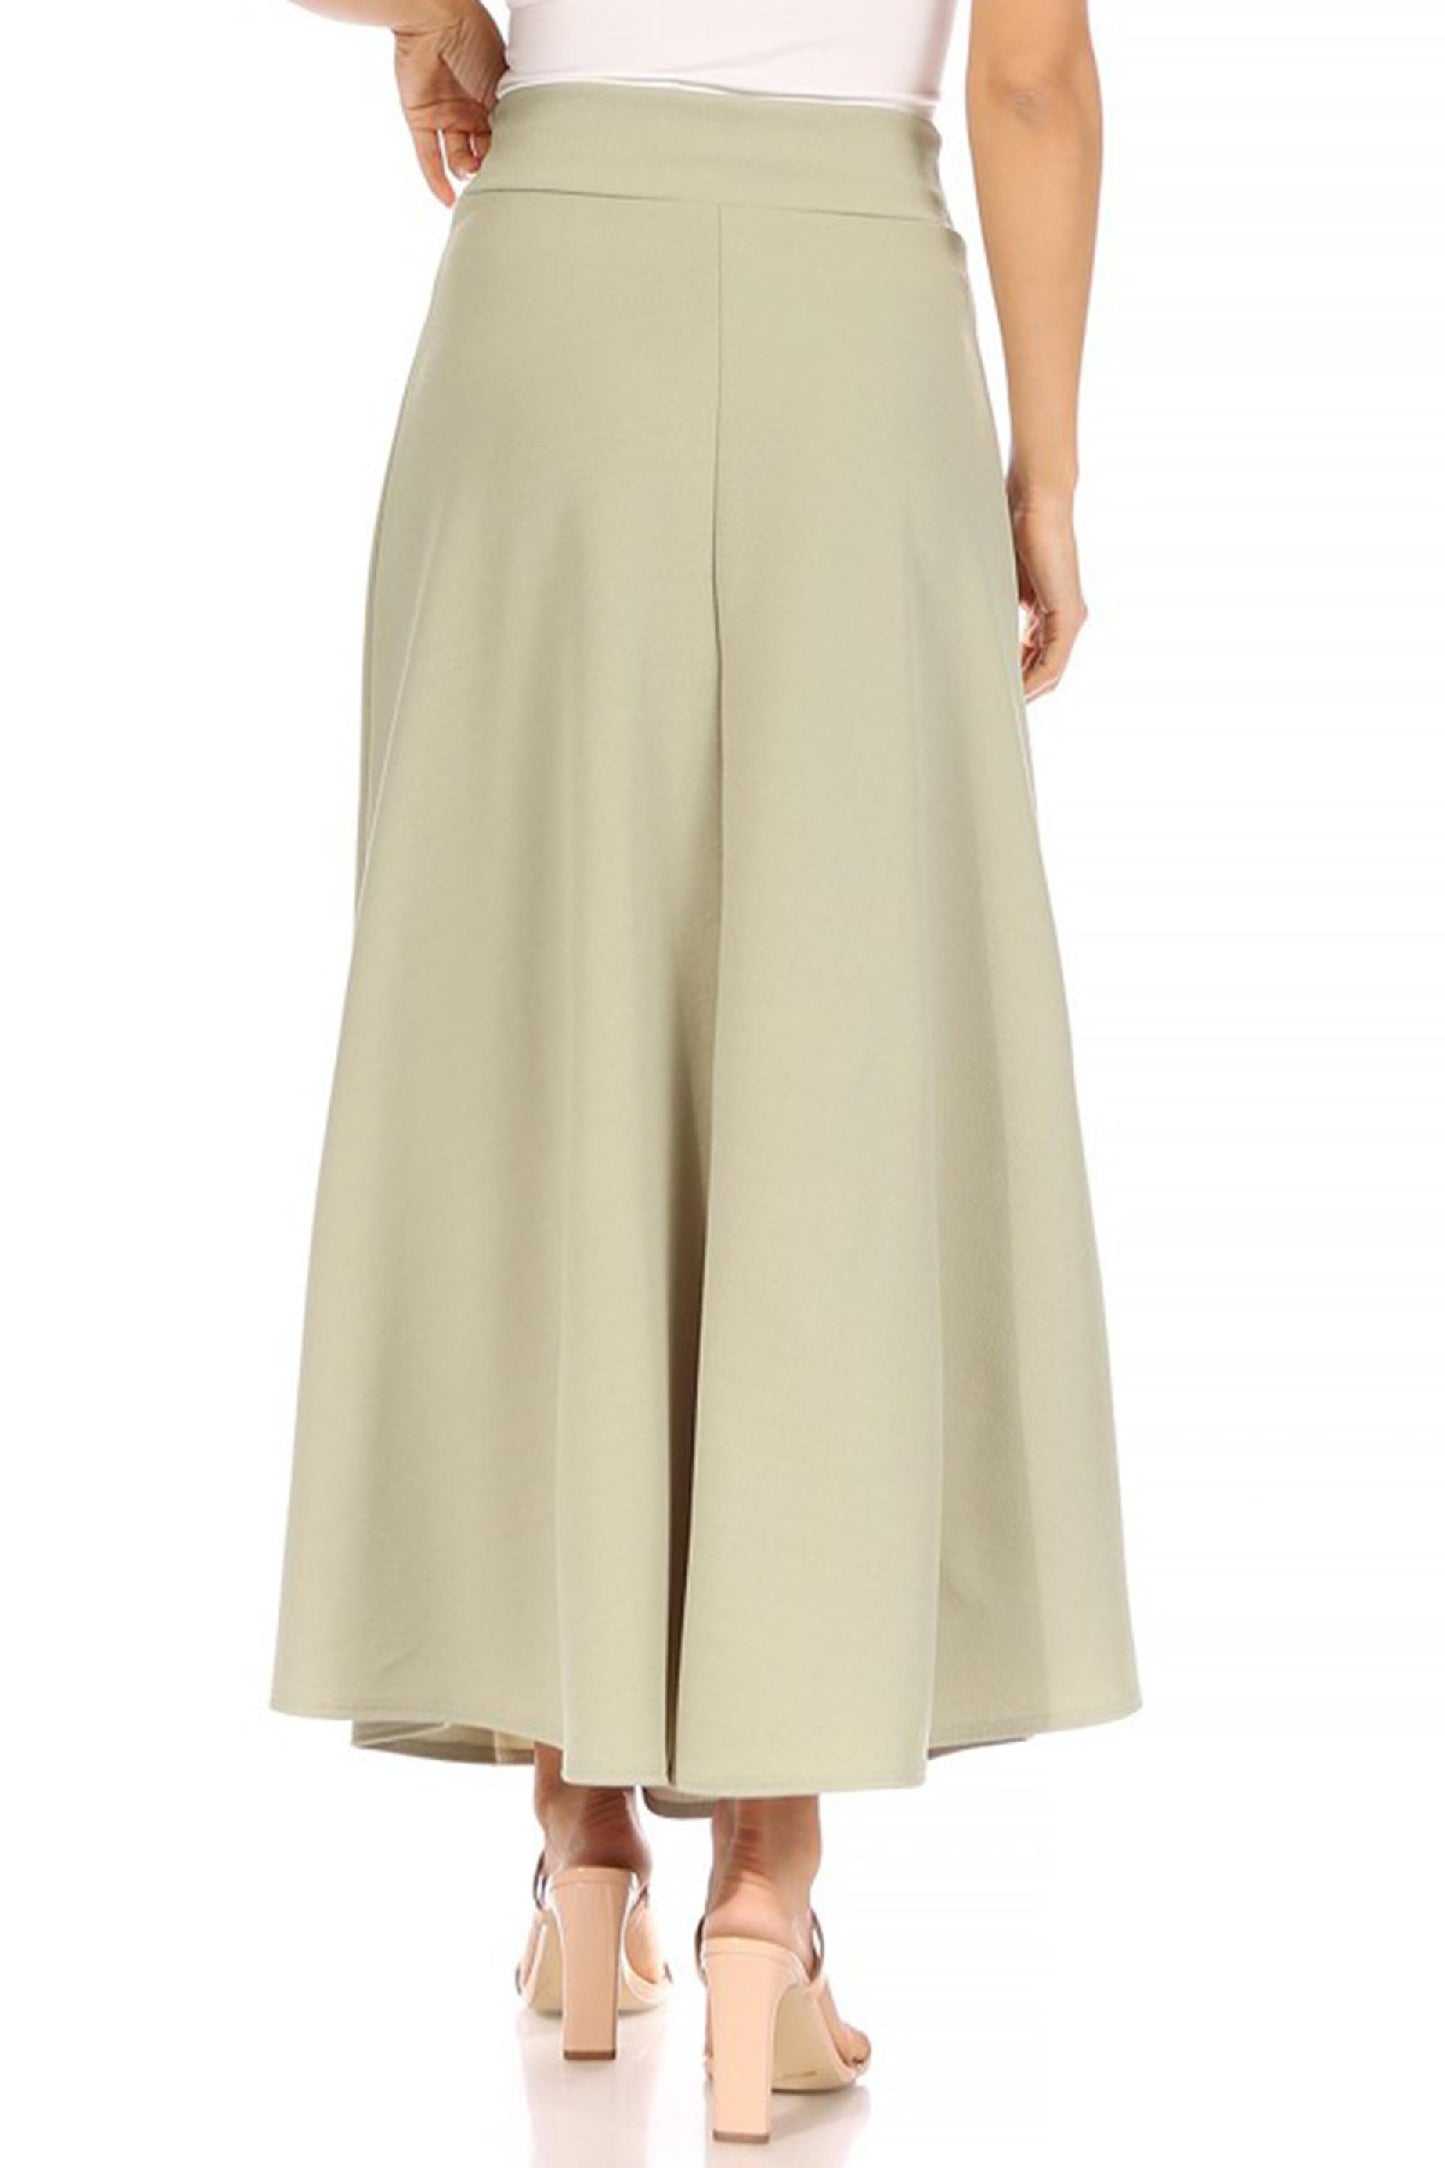 Women's Casual Solid Flare A-line Long Skirt with Elastic Waistband